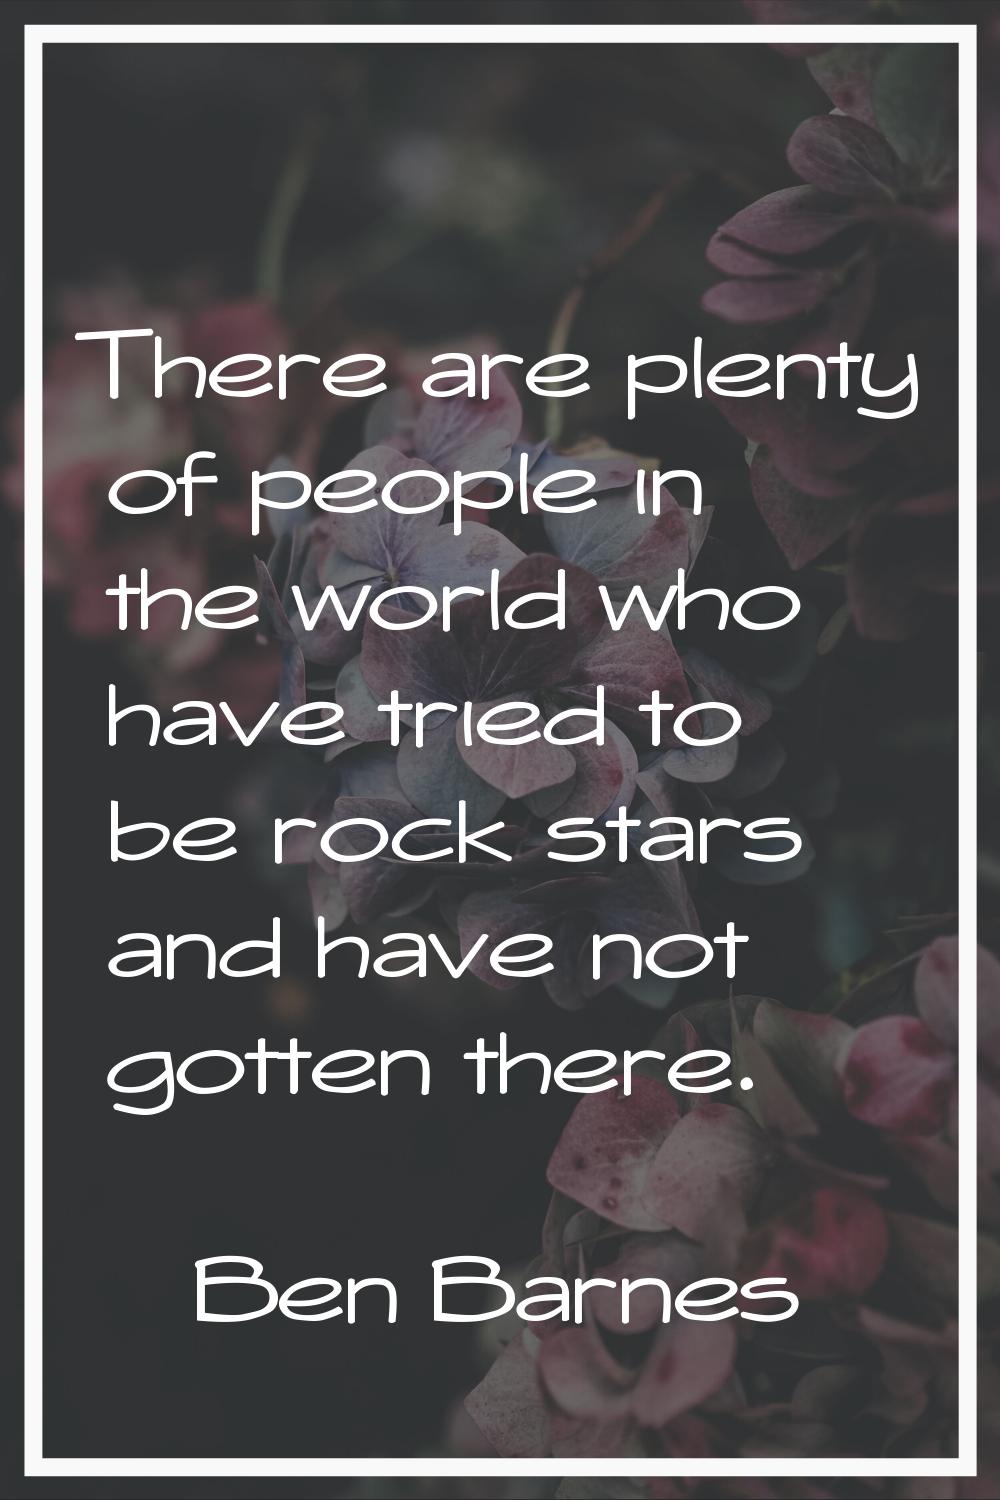 There are plenty of people in the world who have tried to be rock stars and have not gotten there.